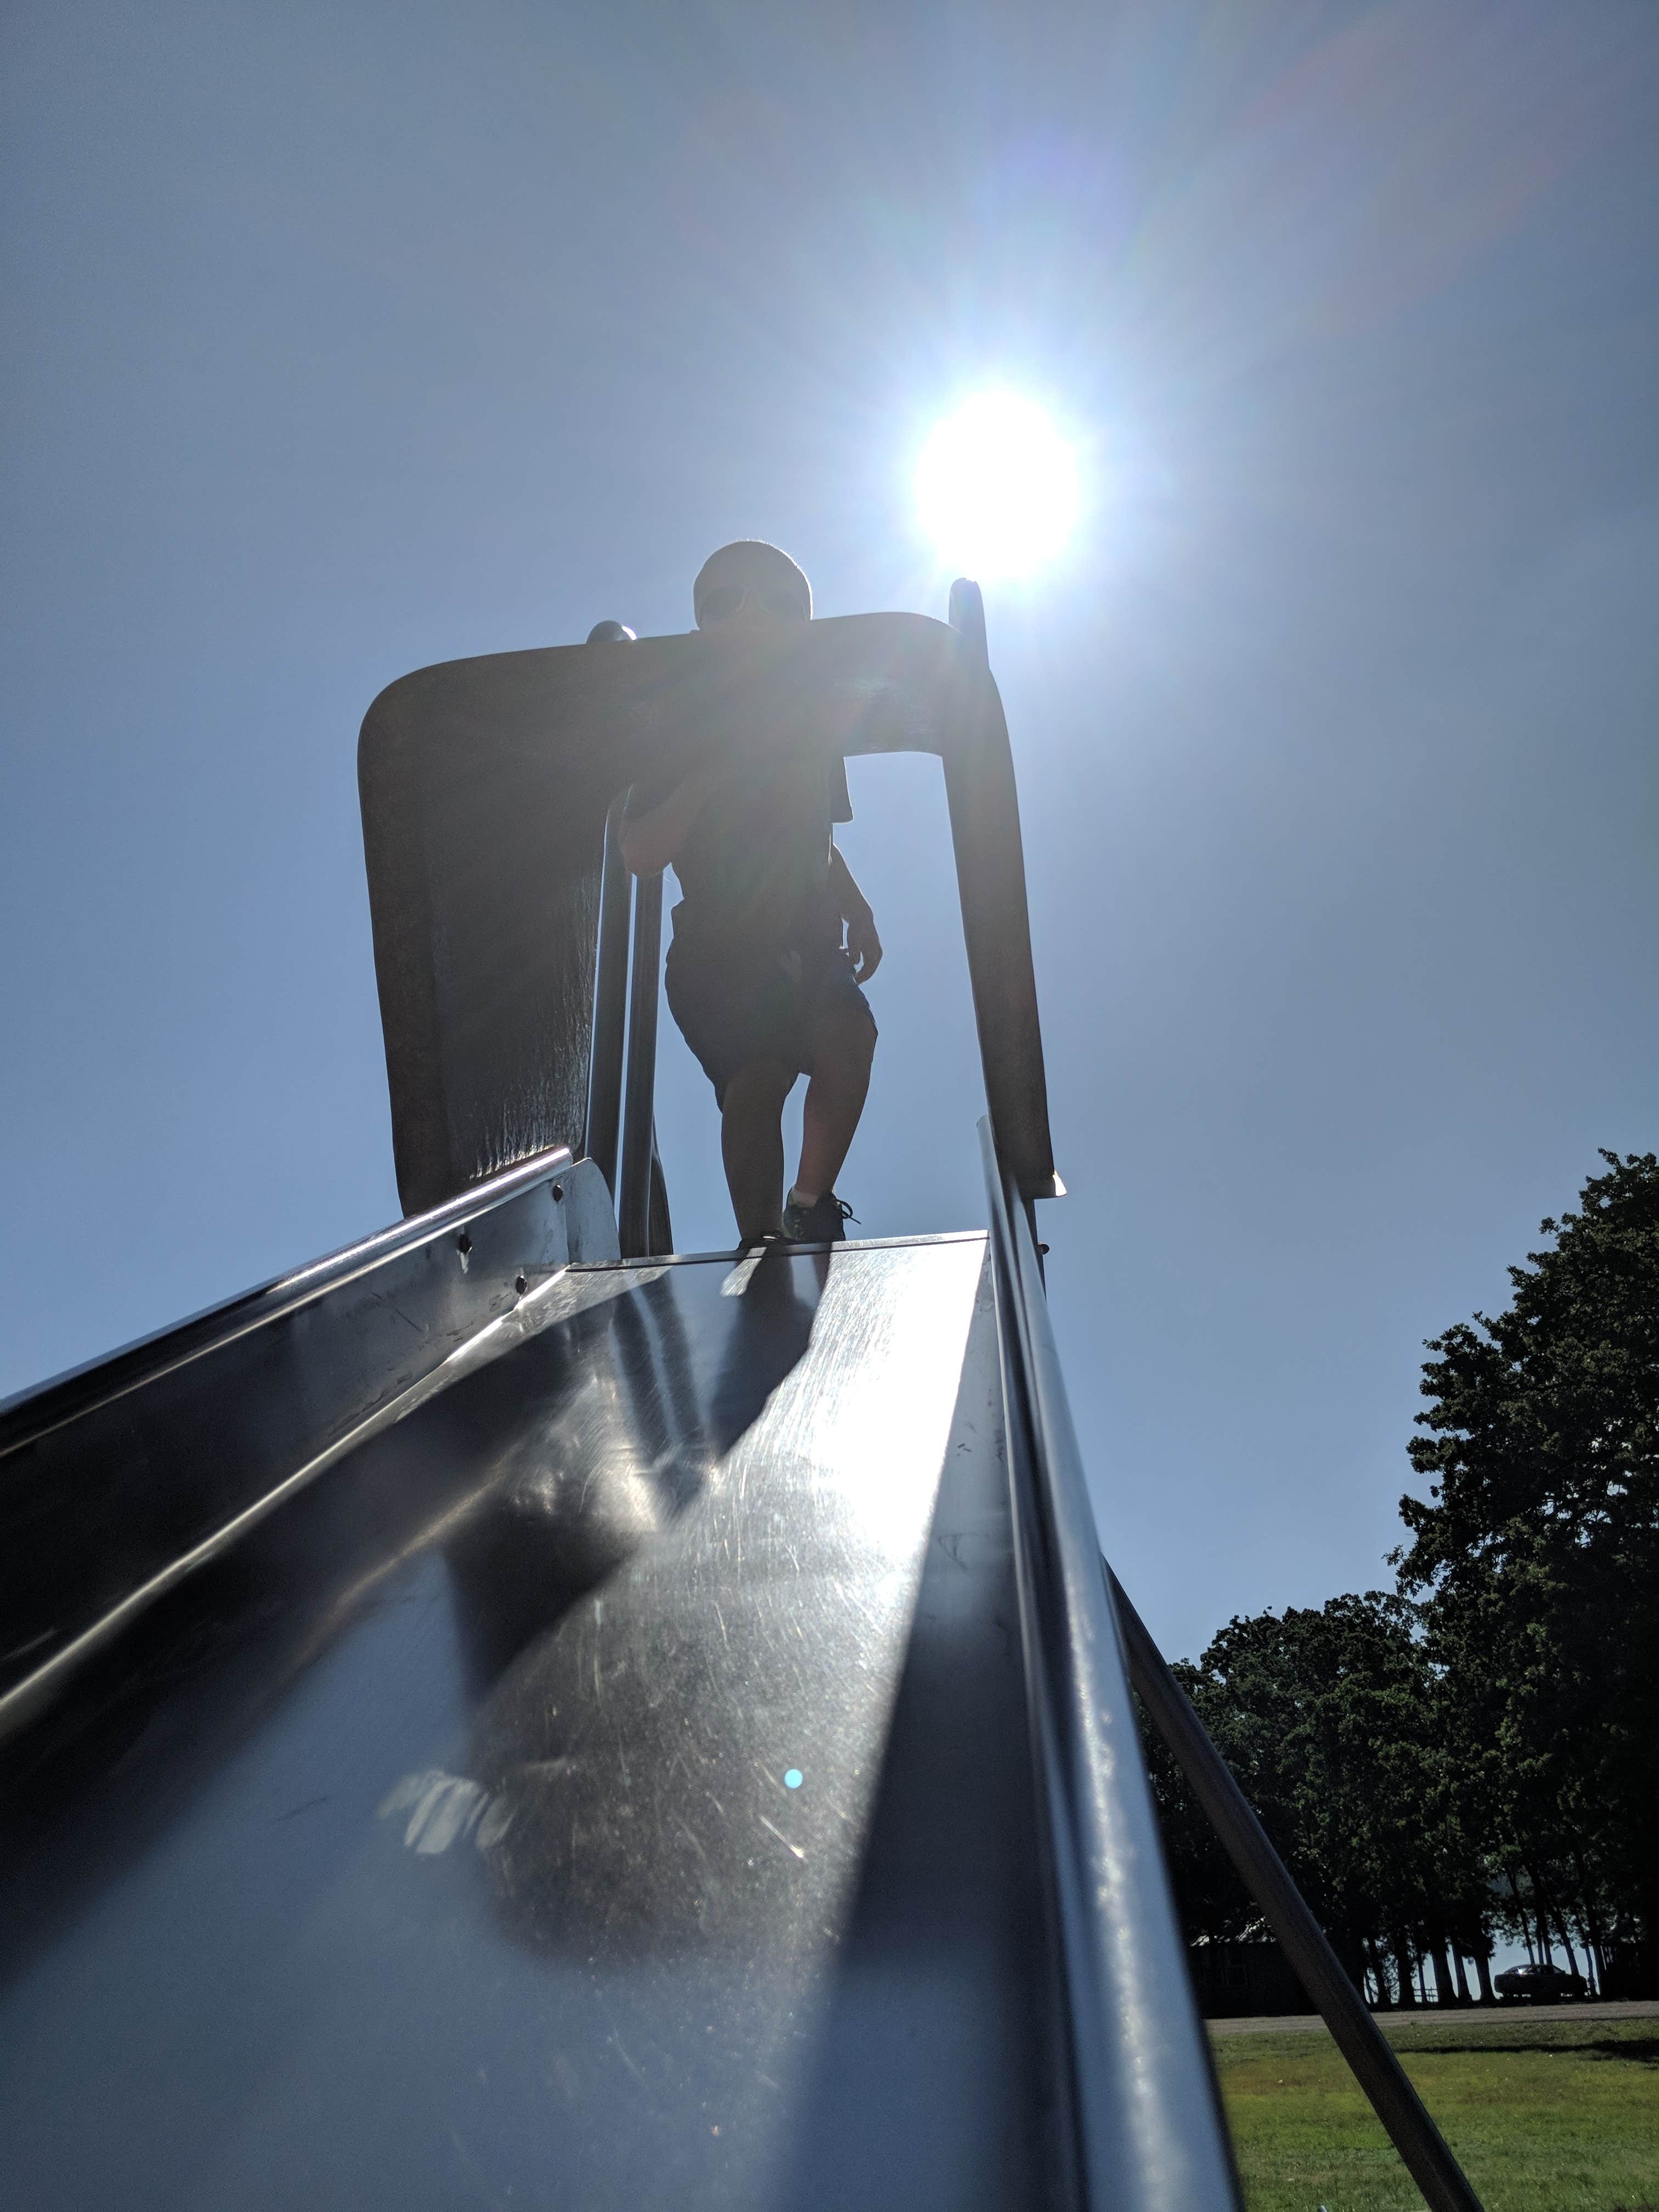 The slide at the small park